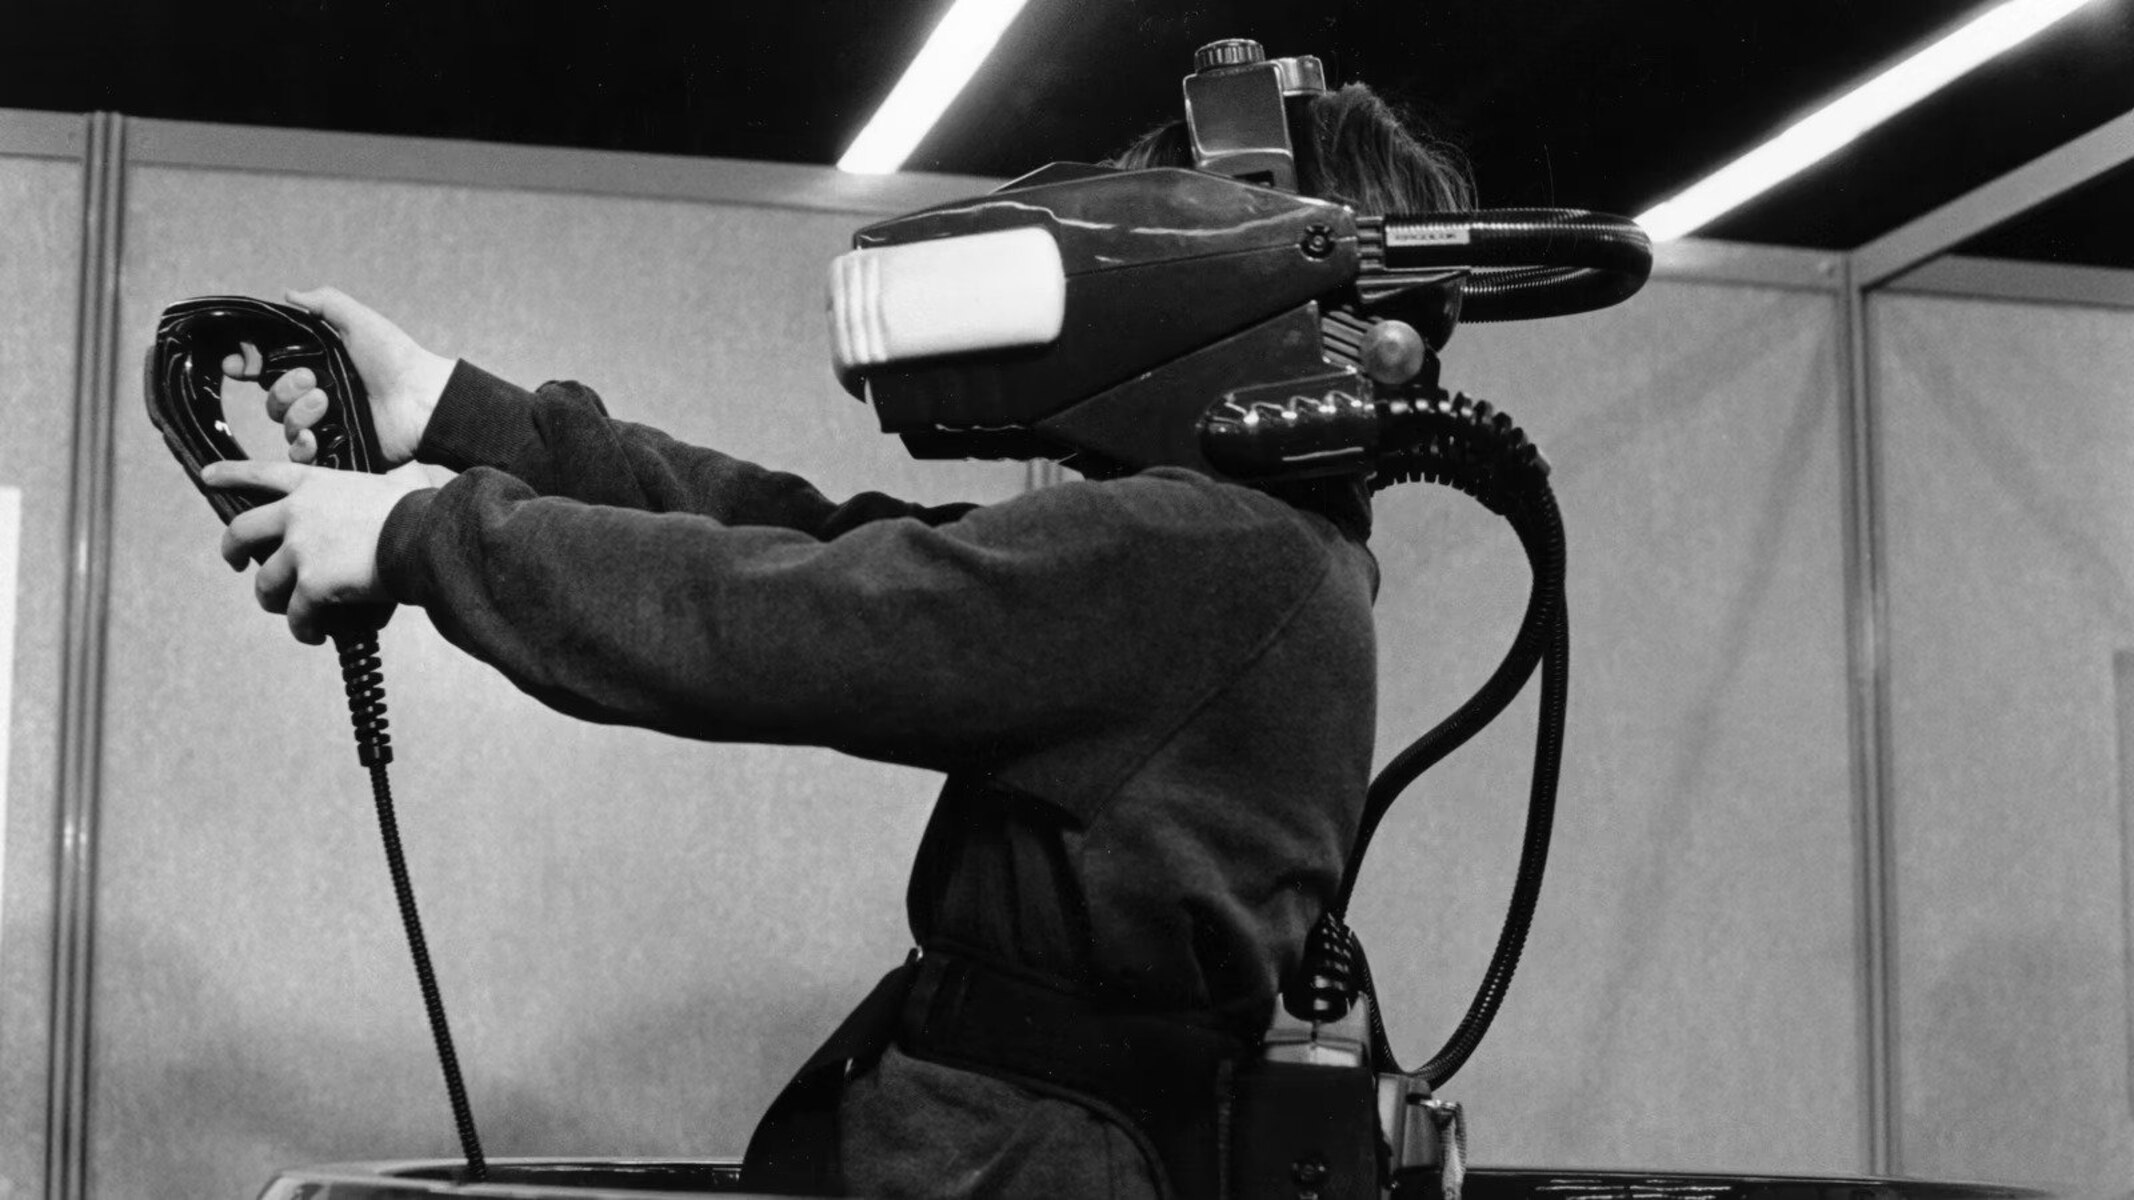 When Was First VR Headset Made